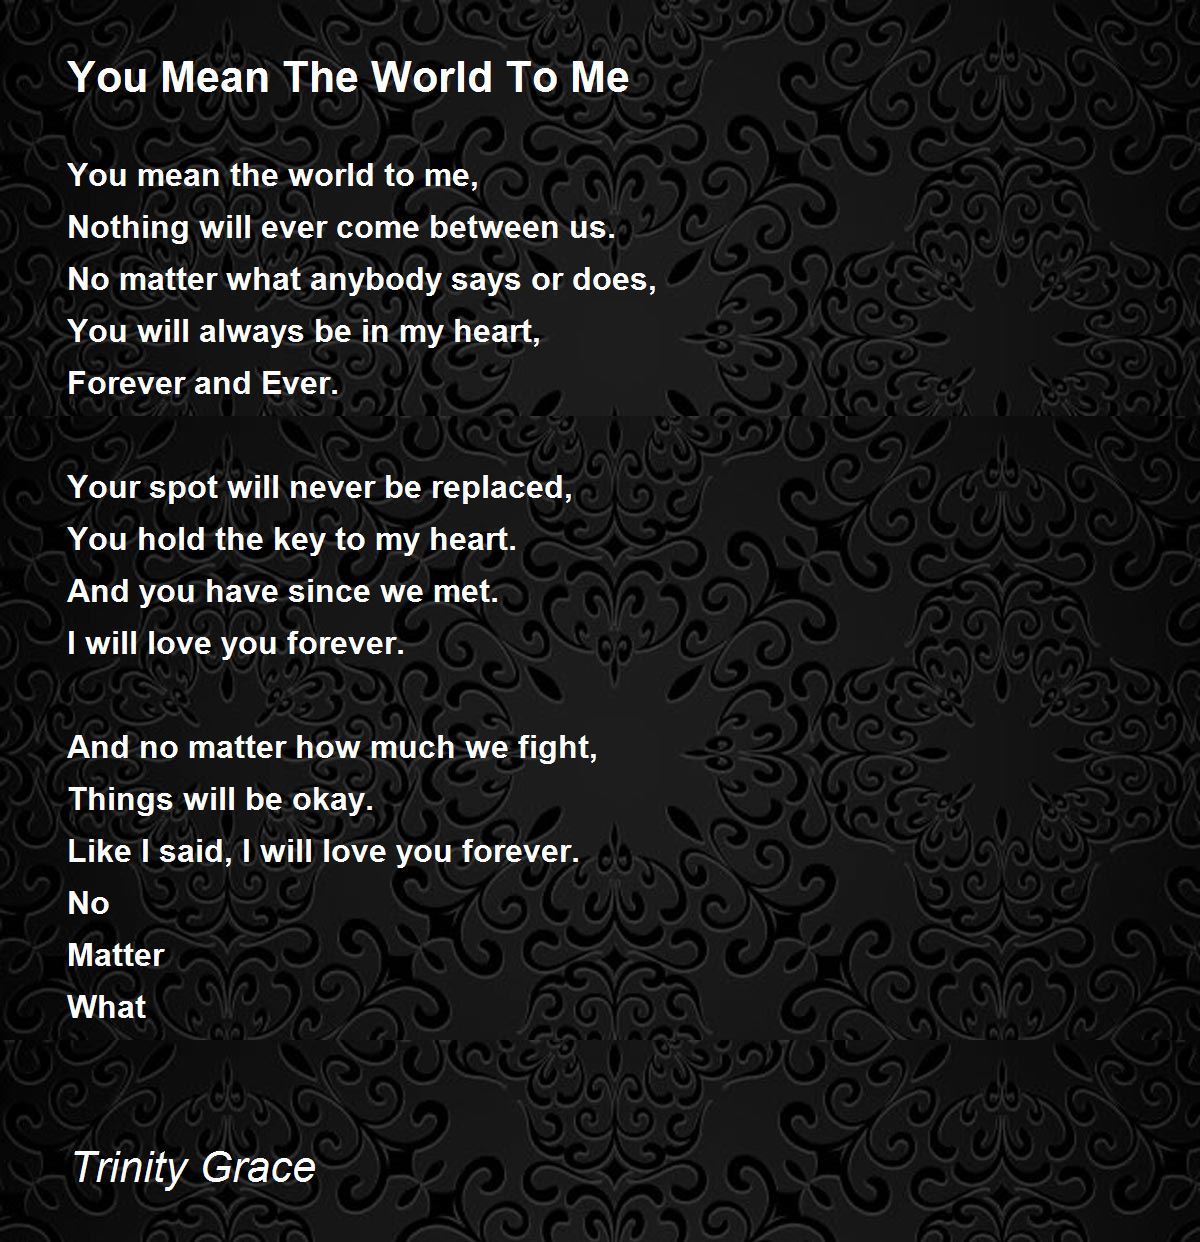 Me poem mean world to you You Mean